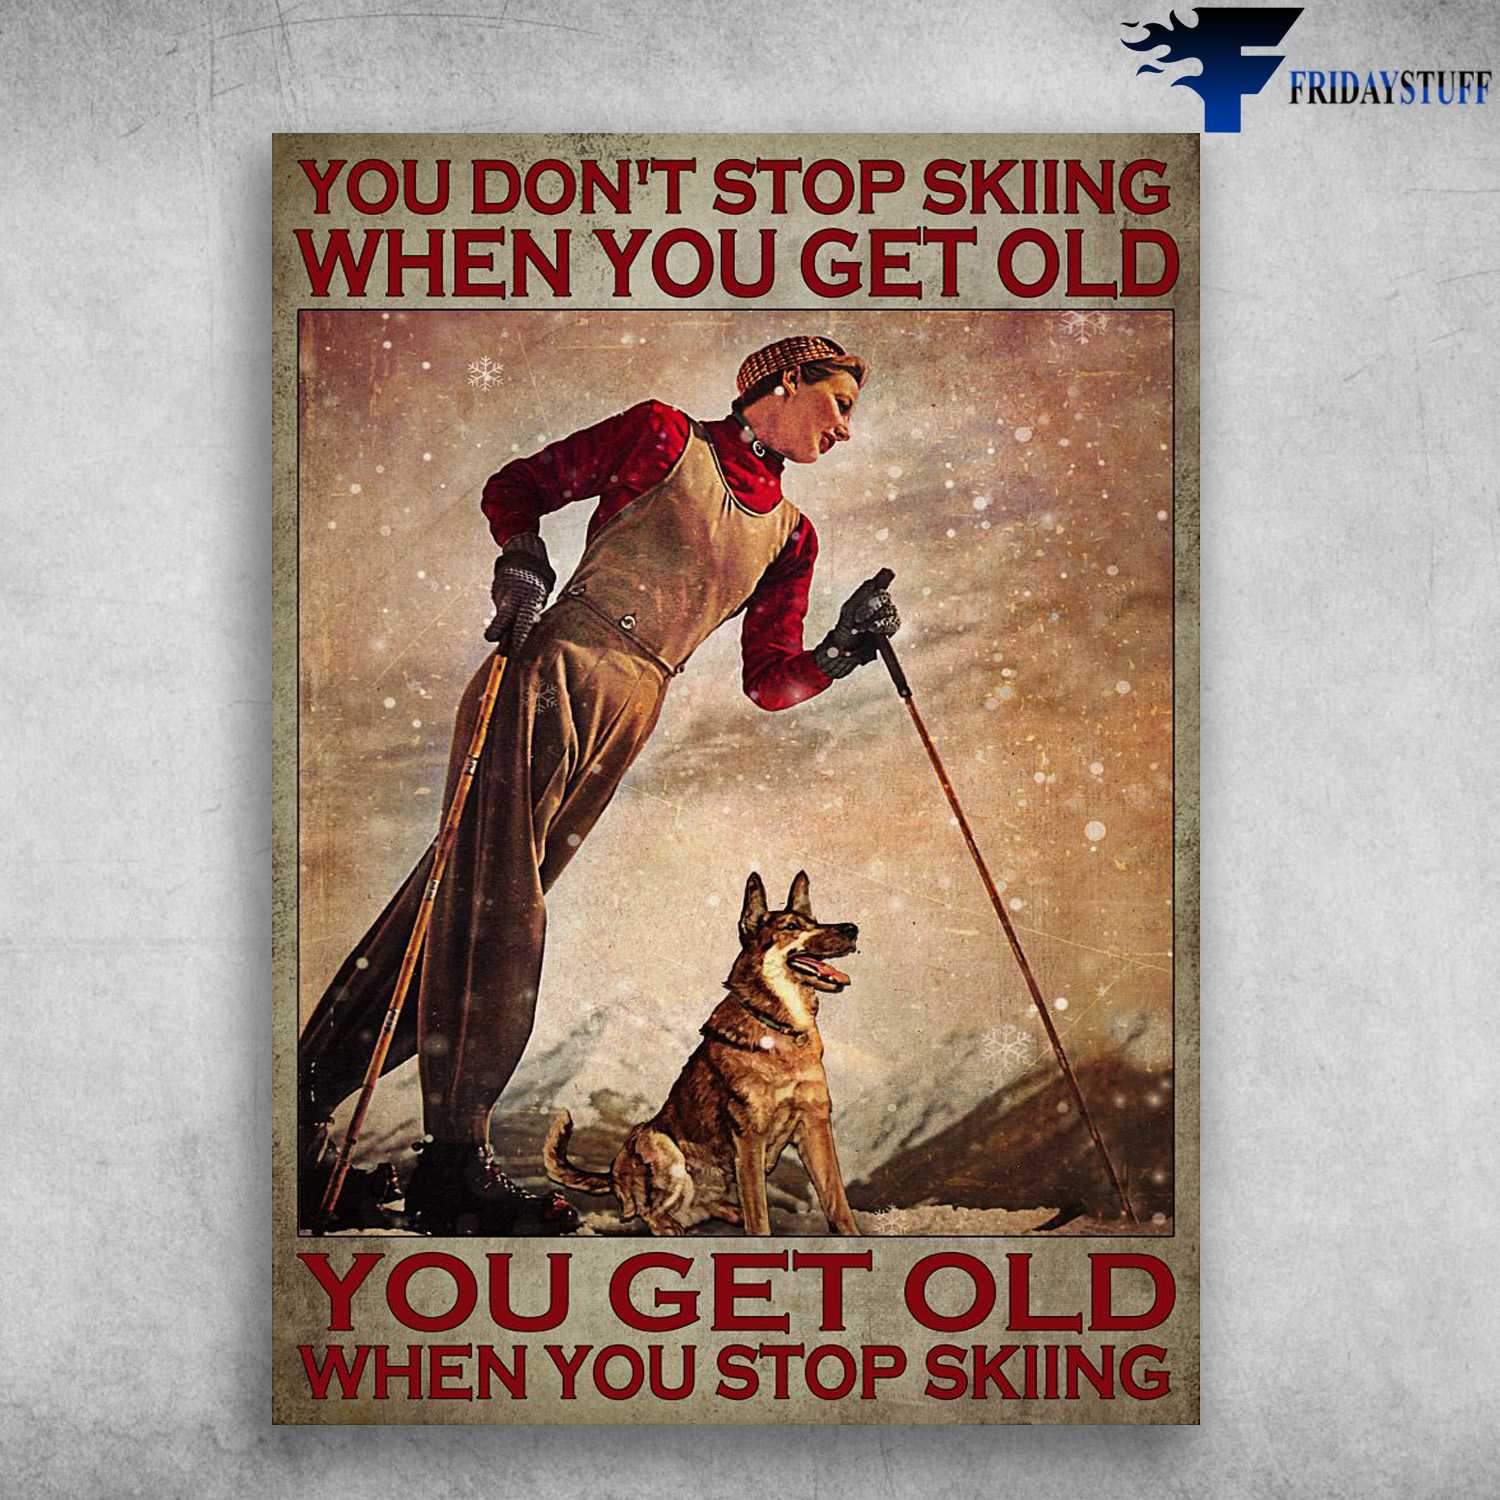 Lady Skiing With Dog - You Don't Stop Skiing When You Get Old, You Get Old When You Stop Skiing